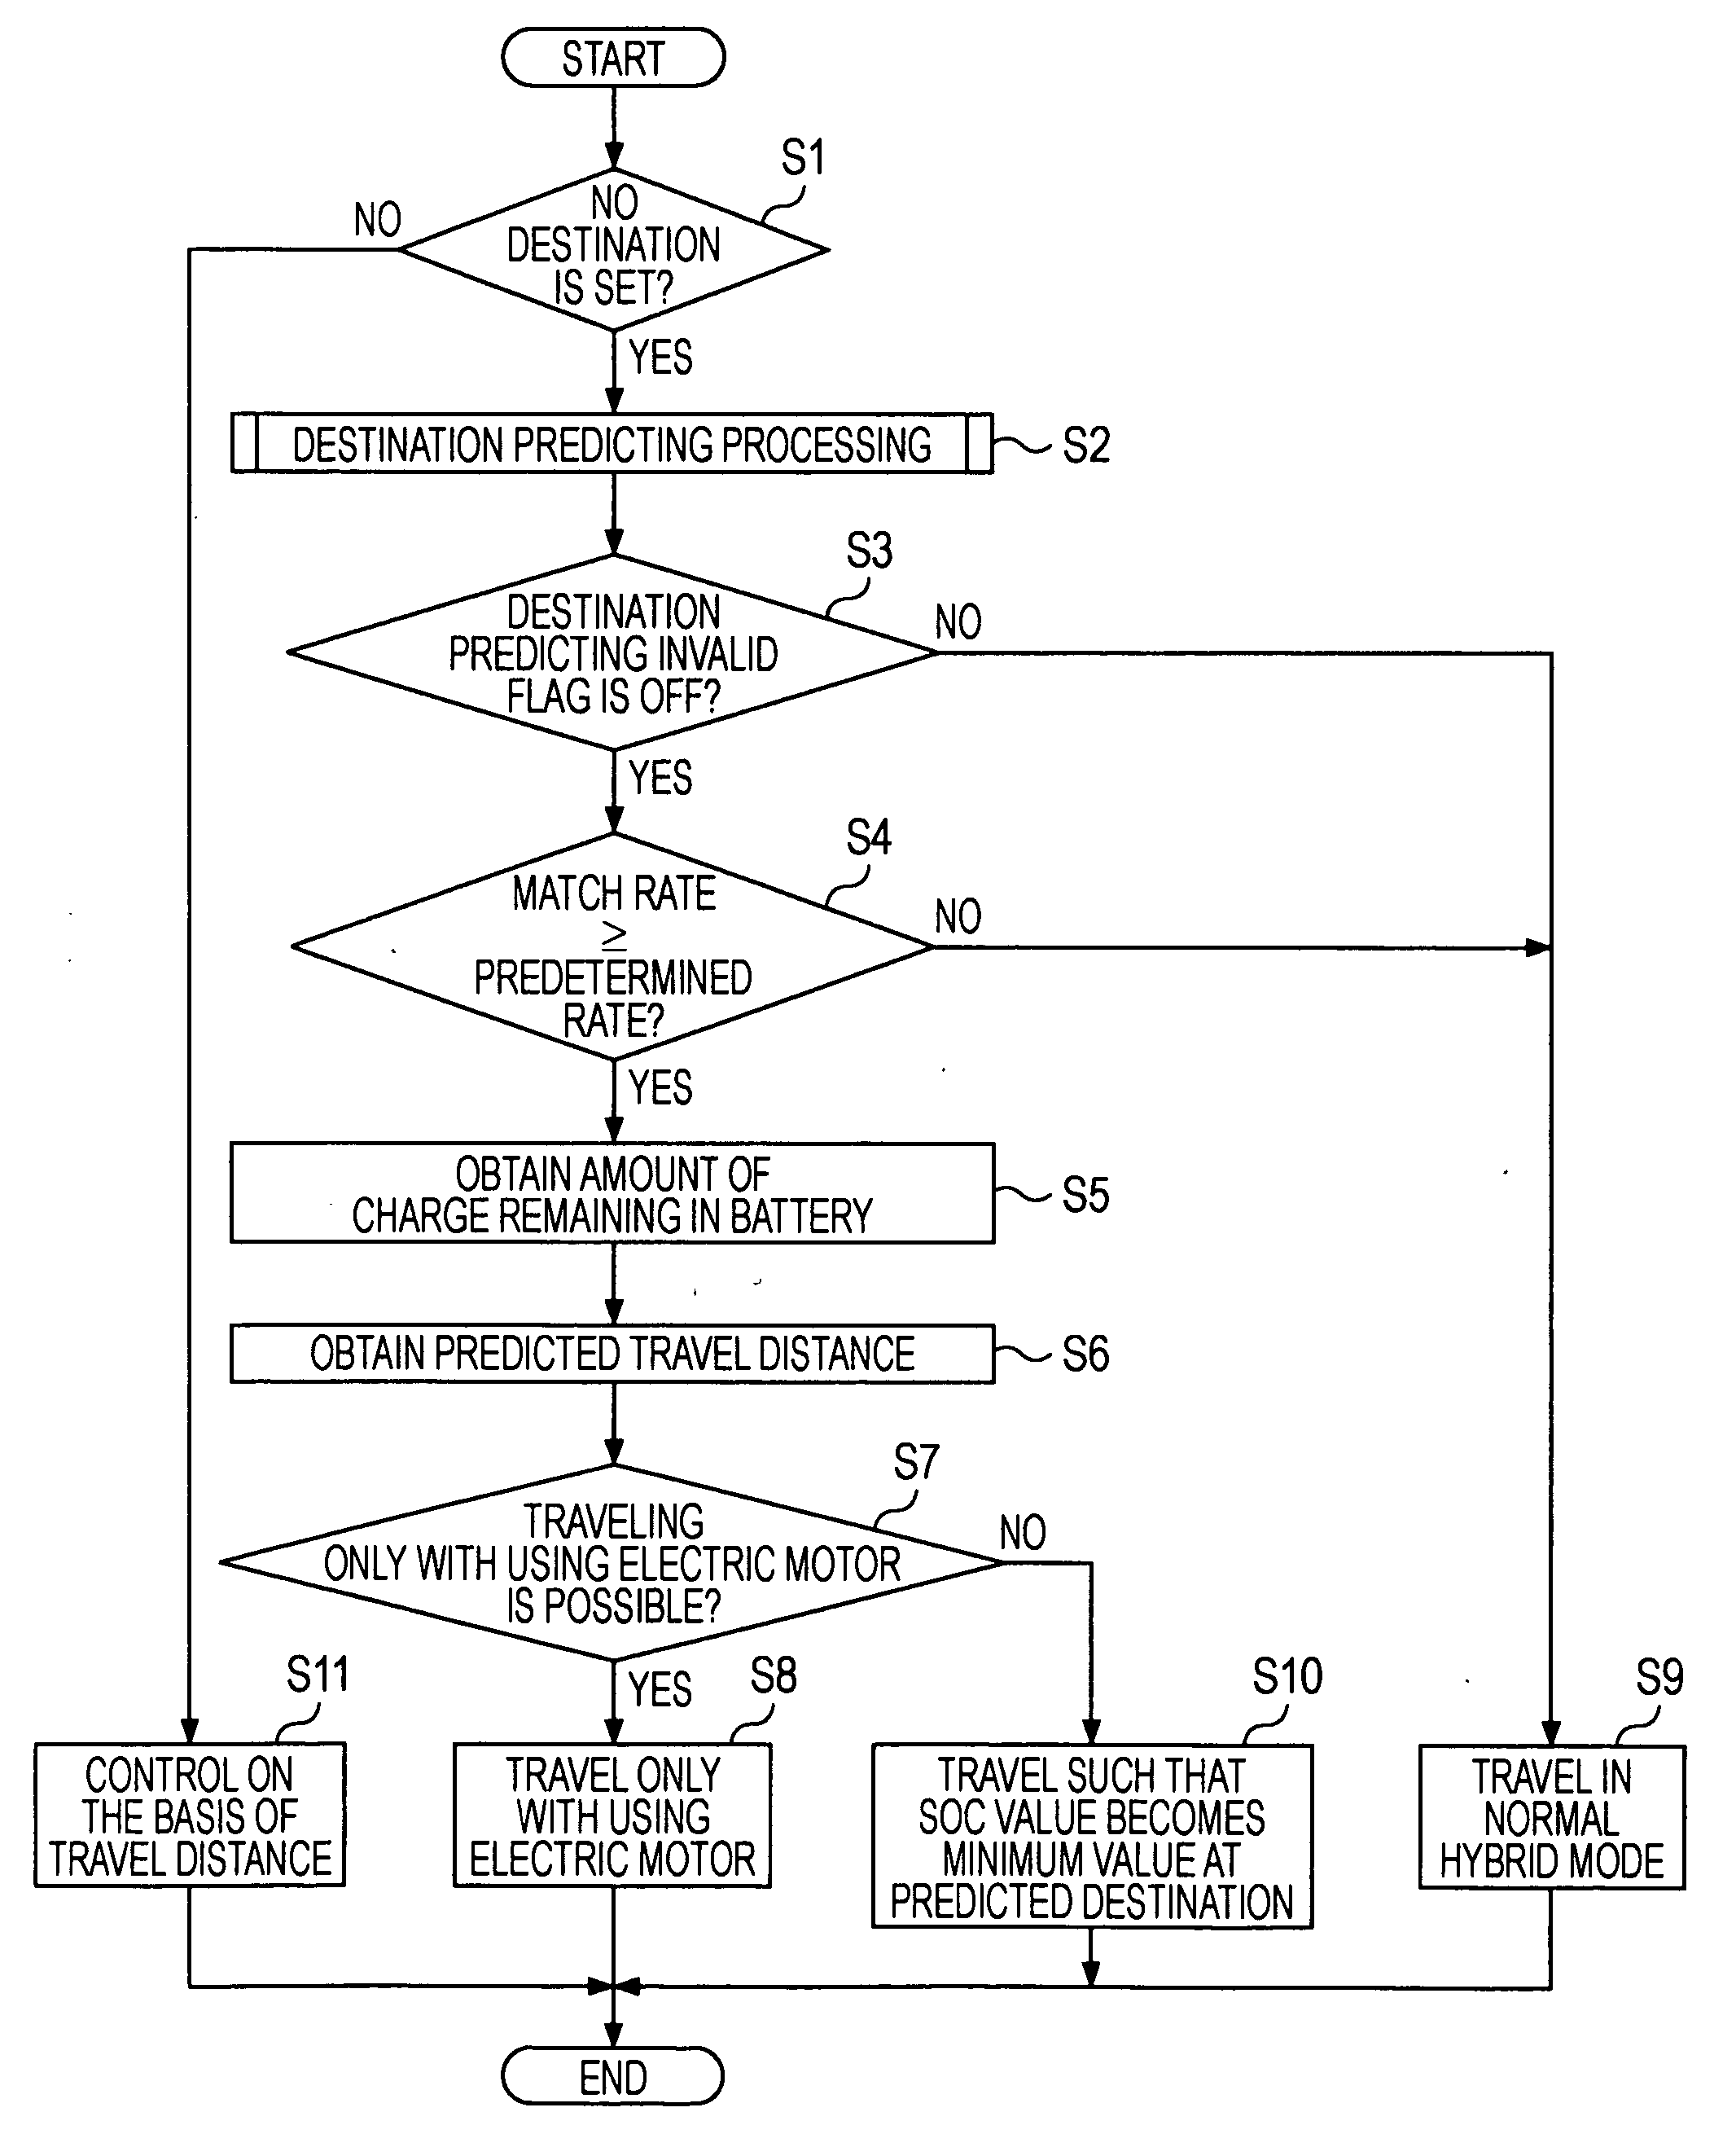 Driving support apparatus, methods, and programs